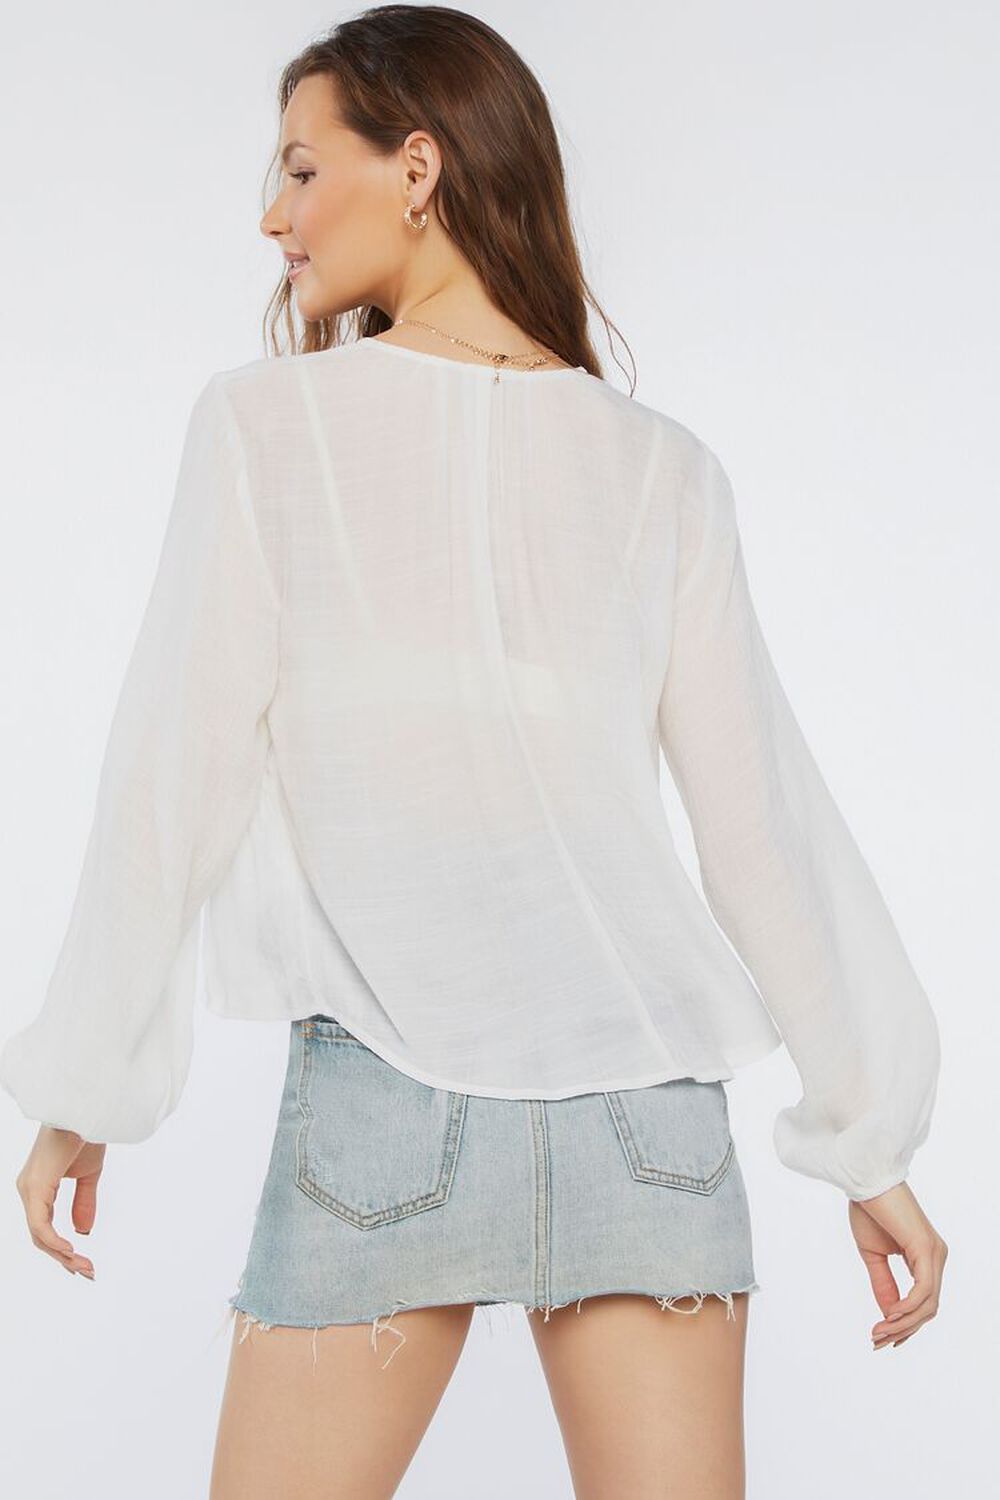 WHITE Plunging Peasant-Sleeve Top, image 3